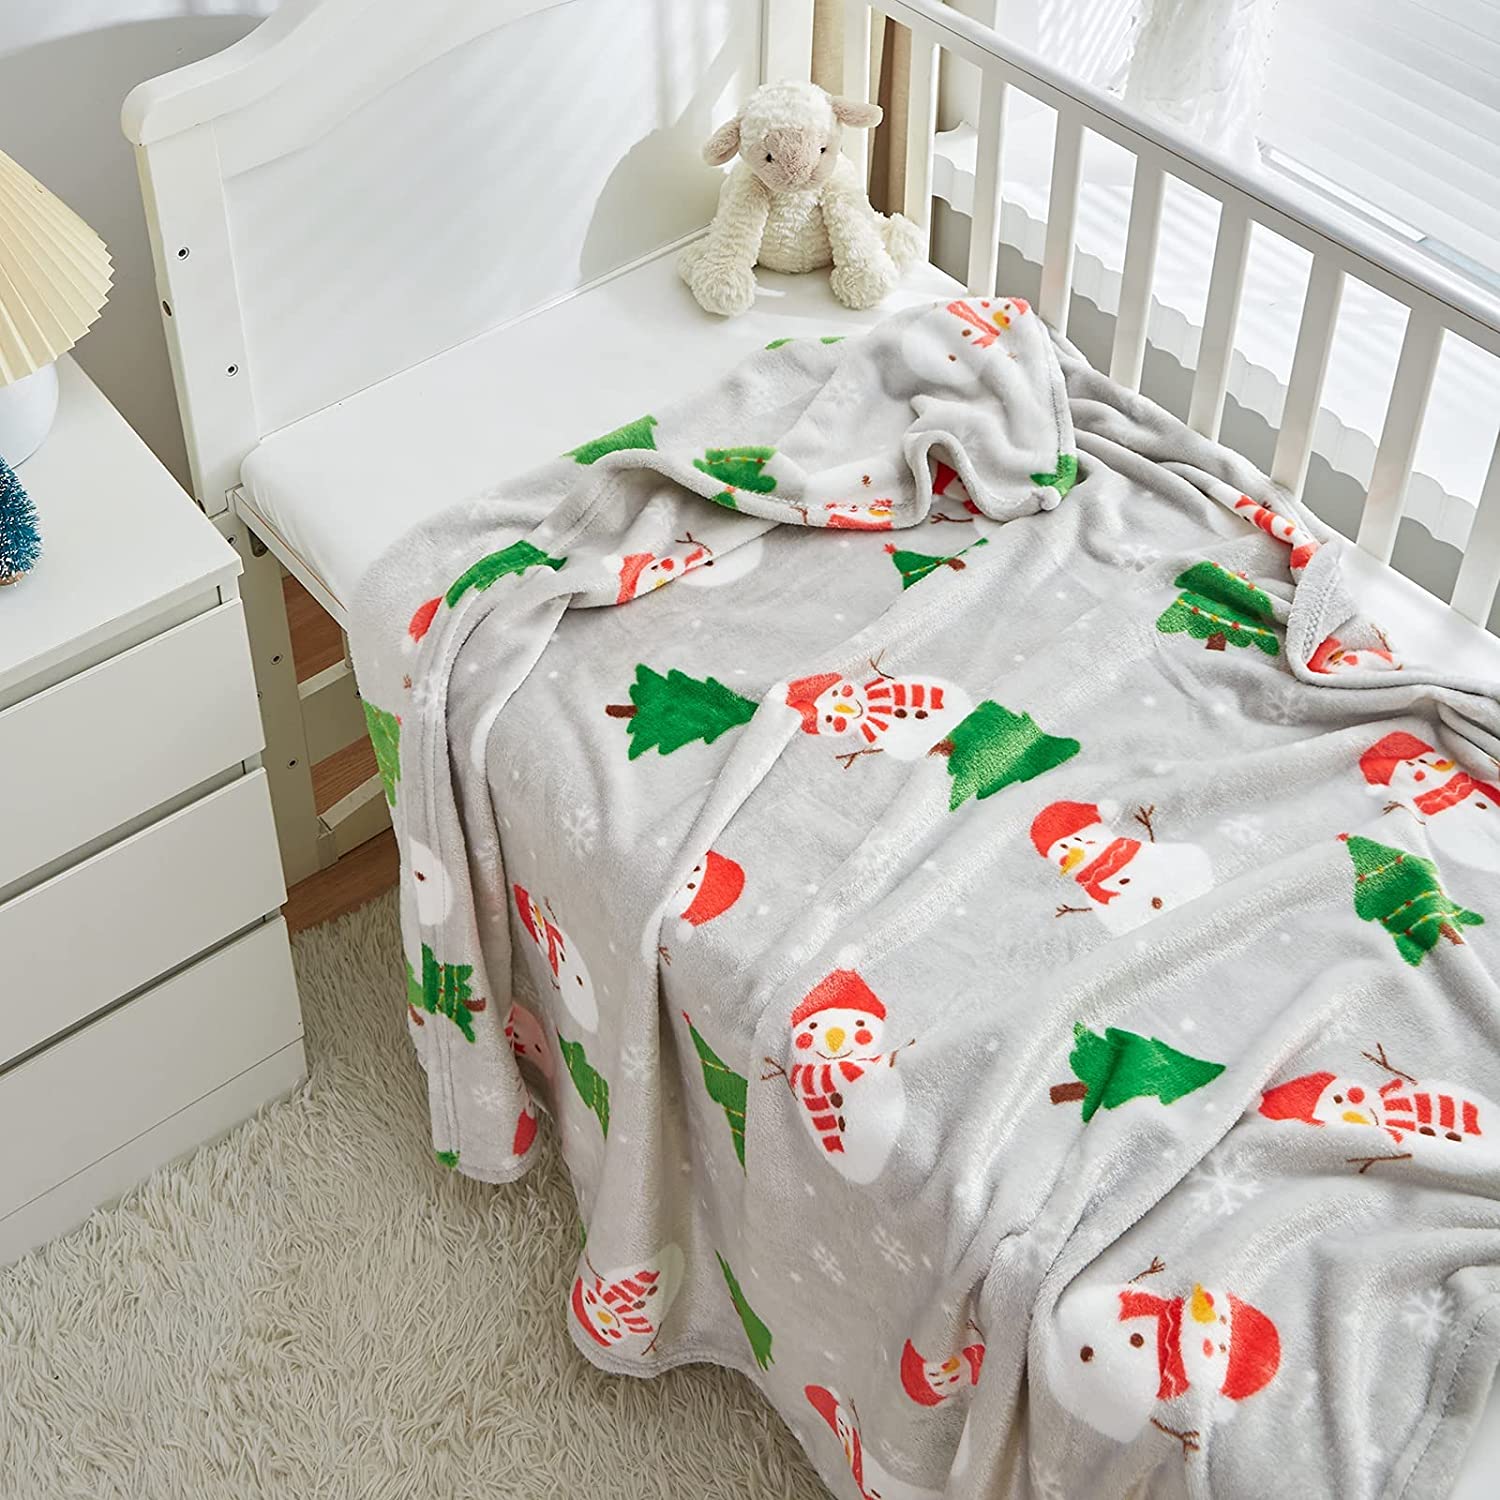 Gray Baby Toddler Blanket All-Season Christmas Style Snowman with Trees Holiday Flannel Fleece Design- Ultra Soft Plush Thin Blanket for Crib